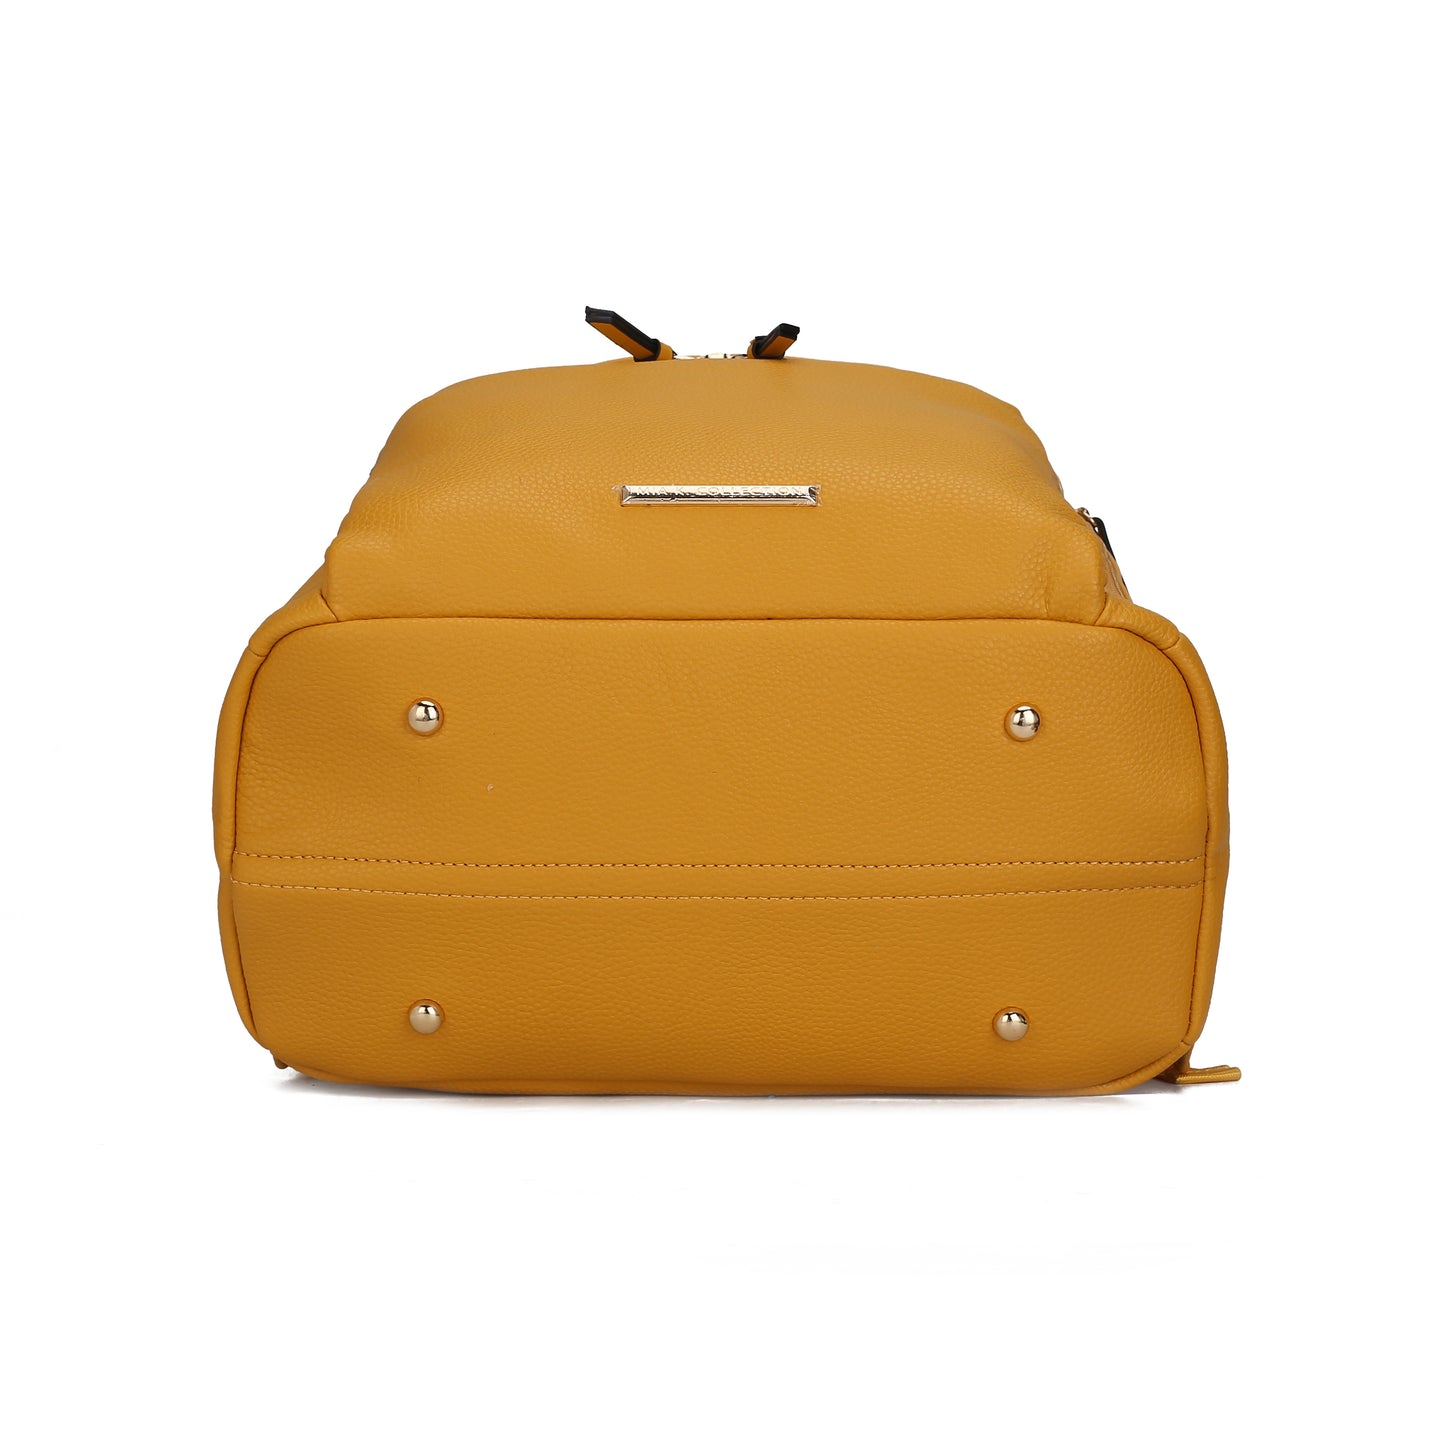 The mustard yellow Angela Large Backpack Vegan Leather by Pink Orpheus, displayed bottom side up, features metal feet for stability along with a small metallic label at the top—perfect for stylish travel.